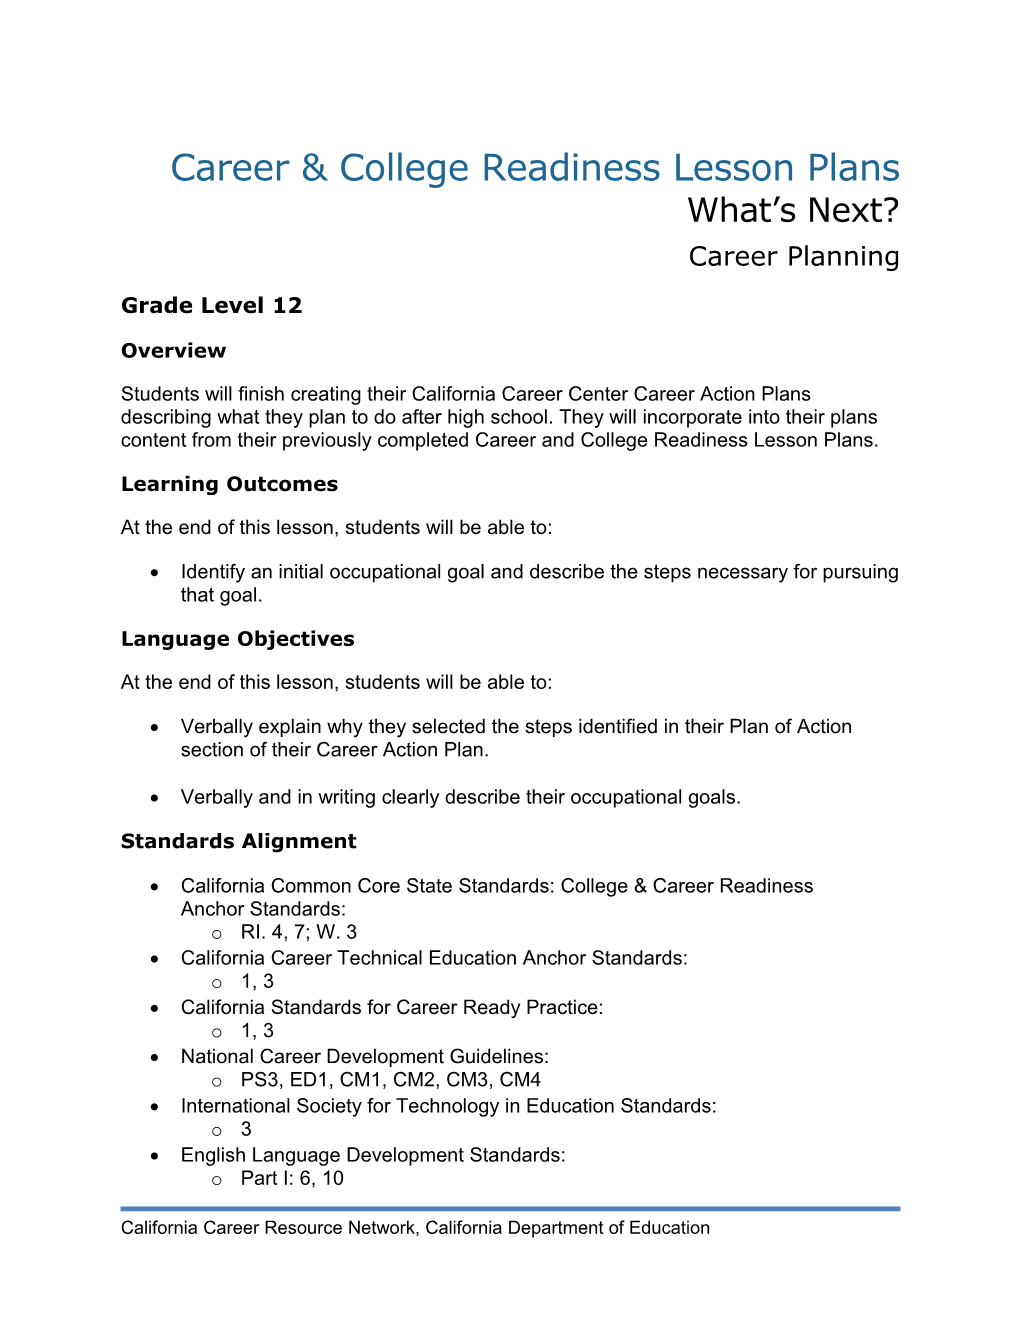 Career & College Readiness Lesson Plans What S Next?